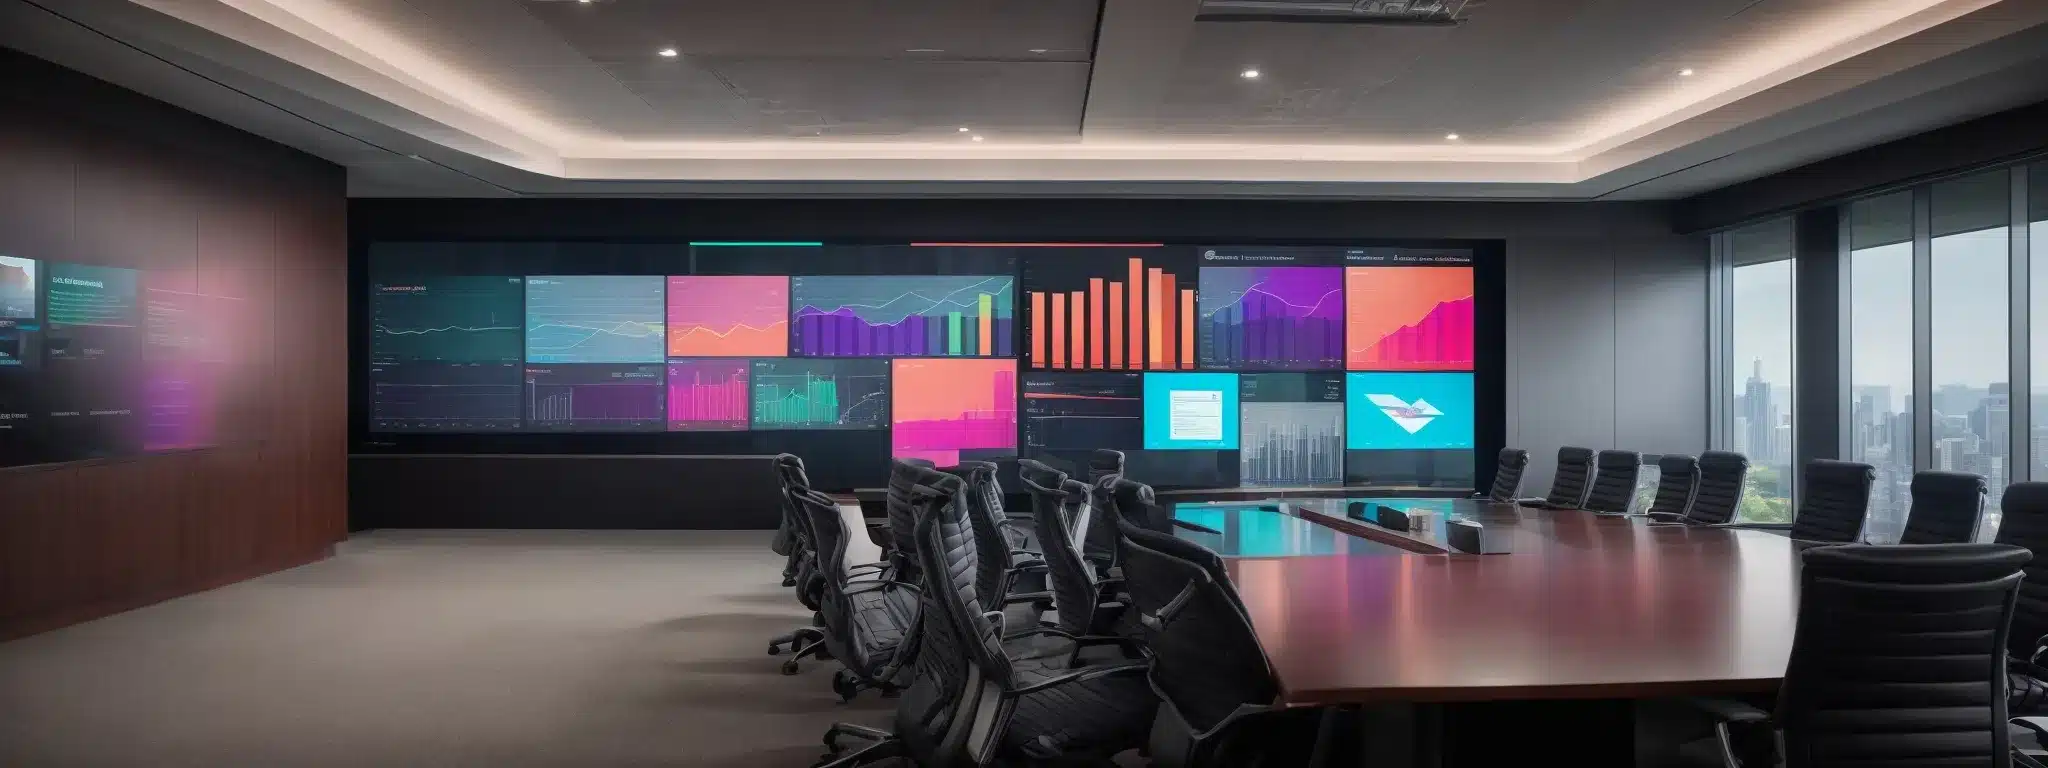 A Corporate Meeting Room With A Large Digital Screen Displaying Colorful Graphs And Marketing Statistics.